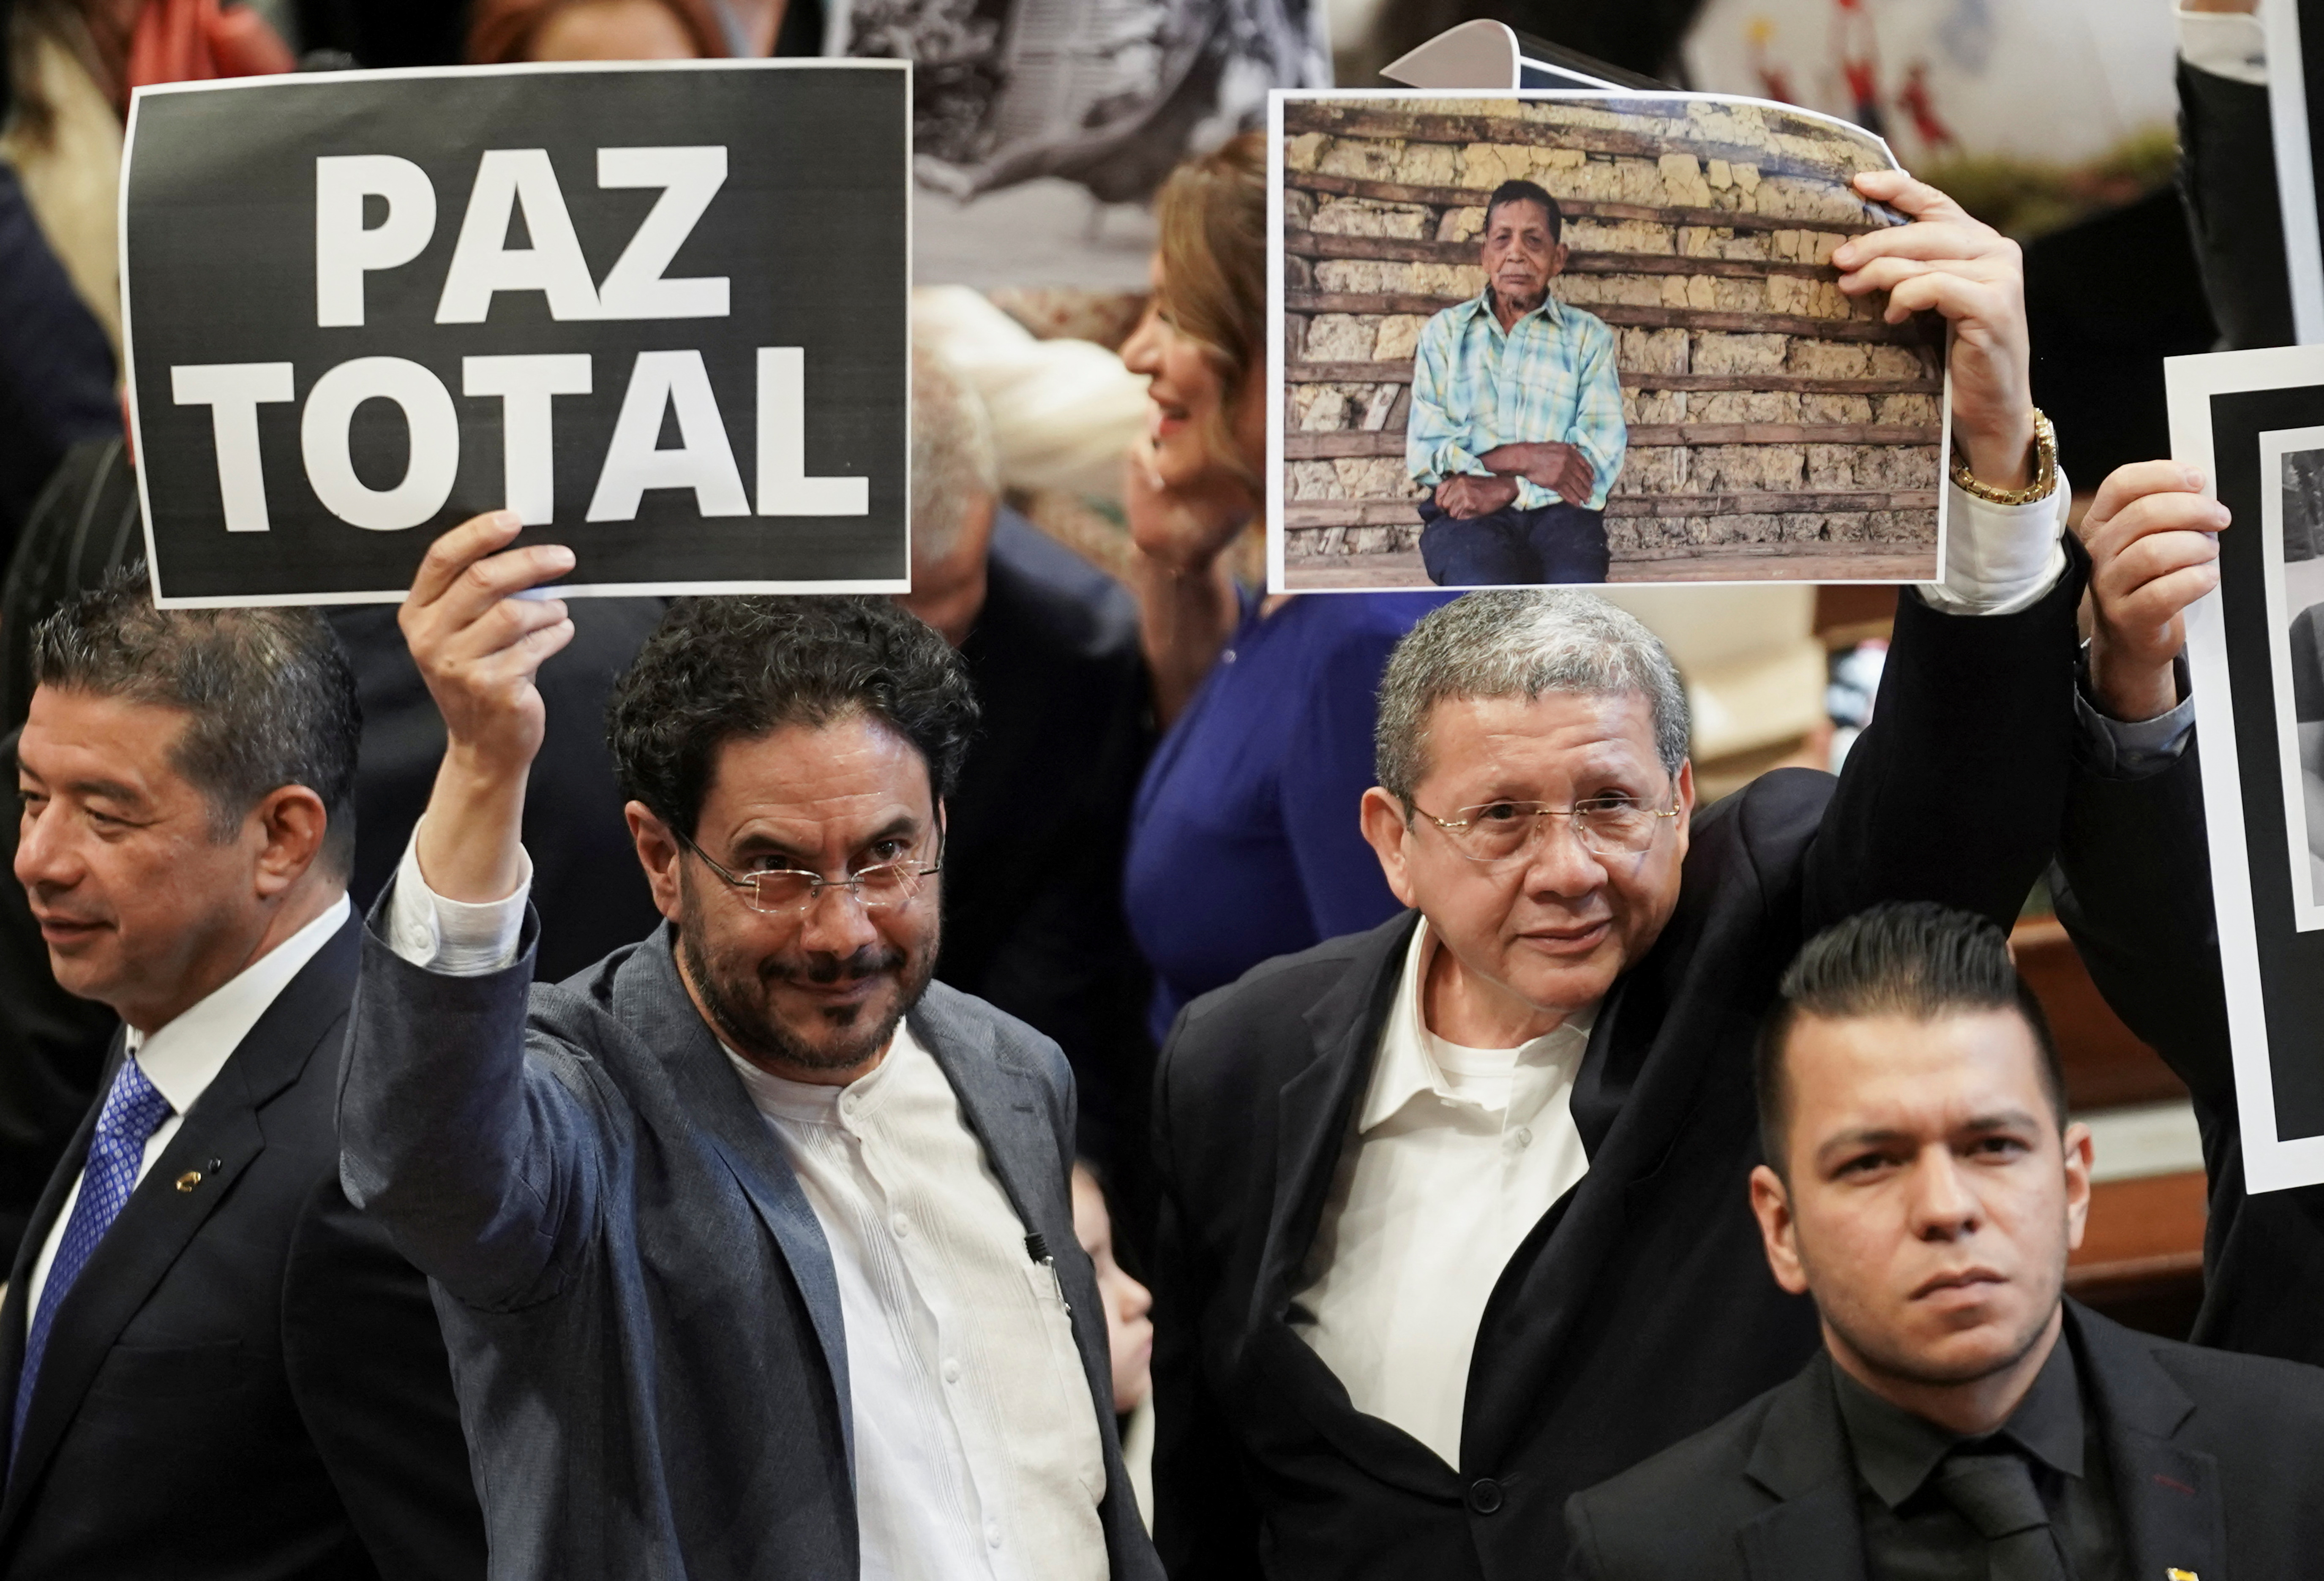 Senator Ivan Cepeda, holding a sign reading "Total peace", and senator Pablo Catatumbo attend the opening of the new session of Colombia's congress ahead of the inauguration of leftist President-elect Gustavo Petro, in Bogota, Colombia July 20, 2022. REUTERS/Nathalia Angarita